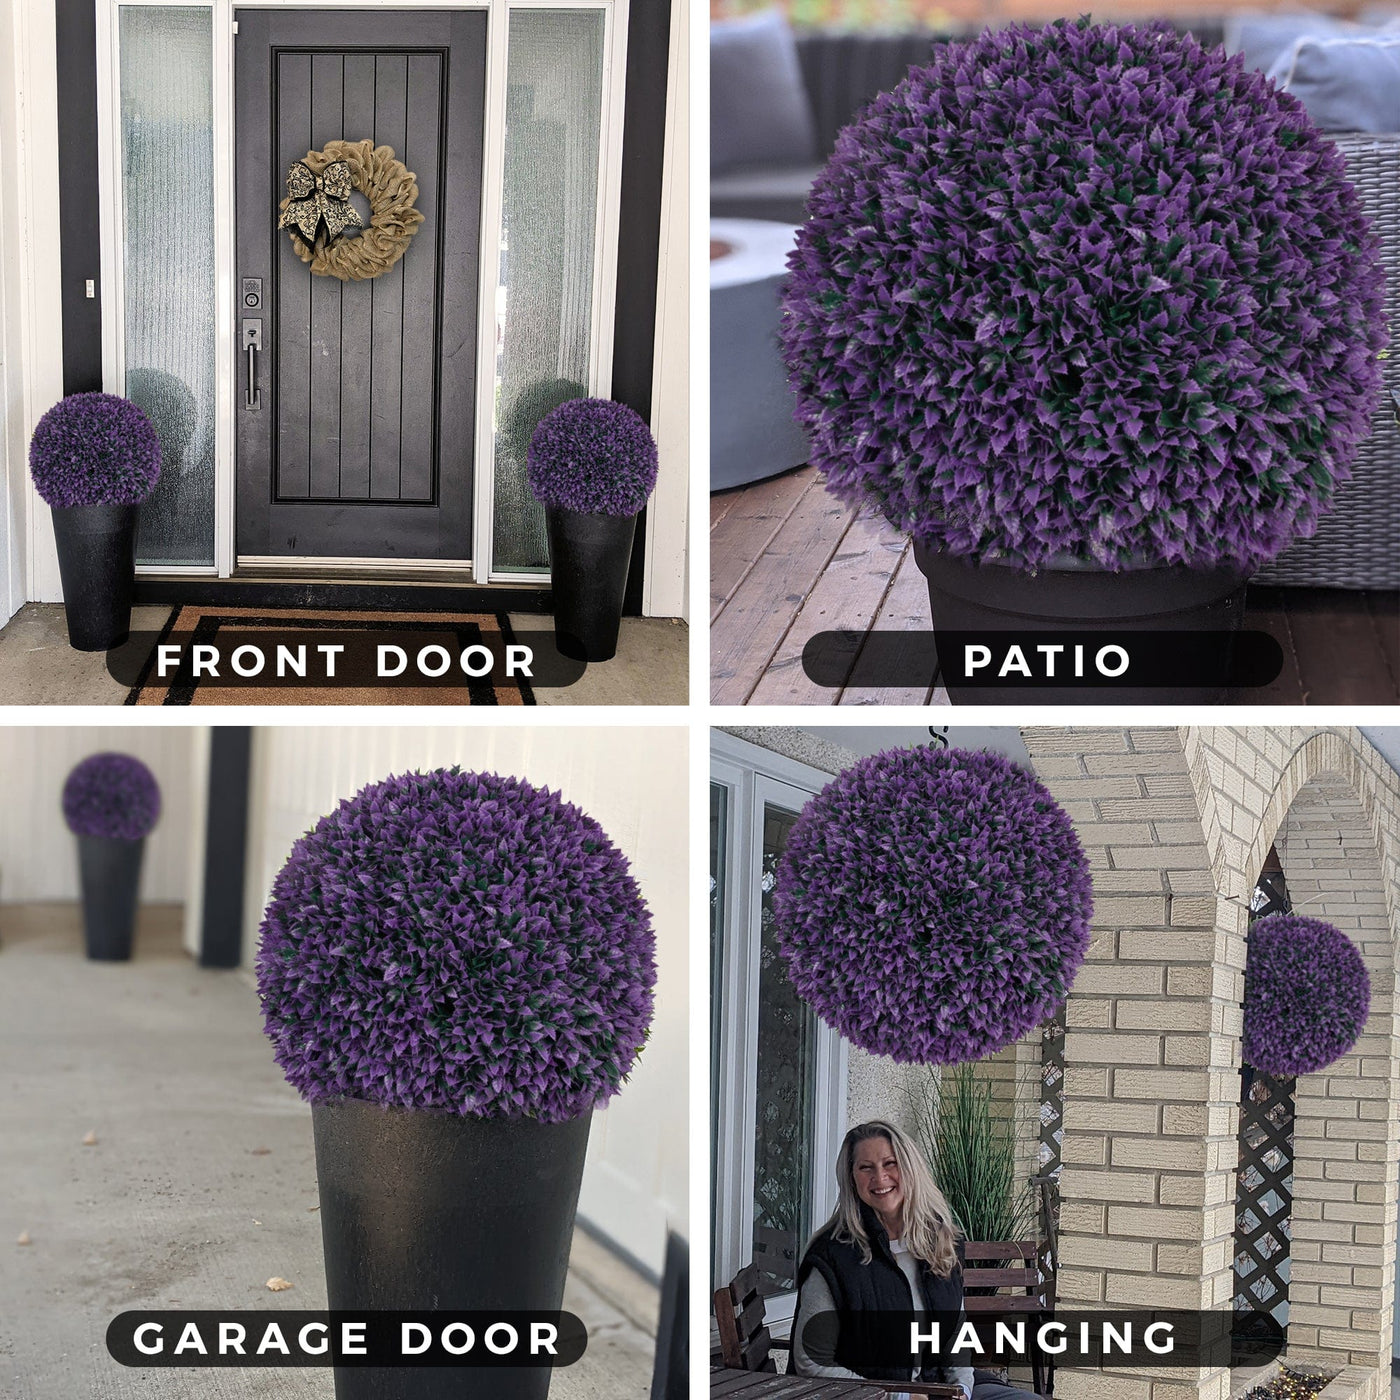 365 Curb Appeal Topiary ball 16" Size Large - Set of 2 Large Jagged Purple Leaf Topiary Balls